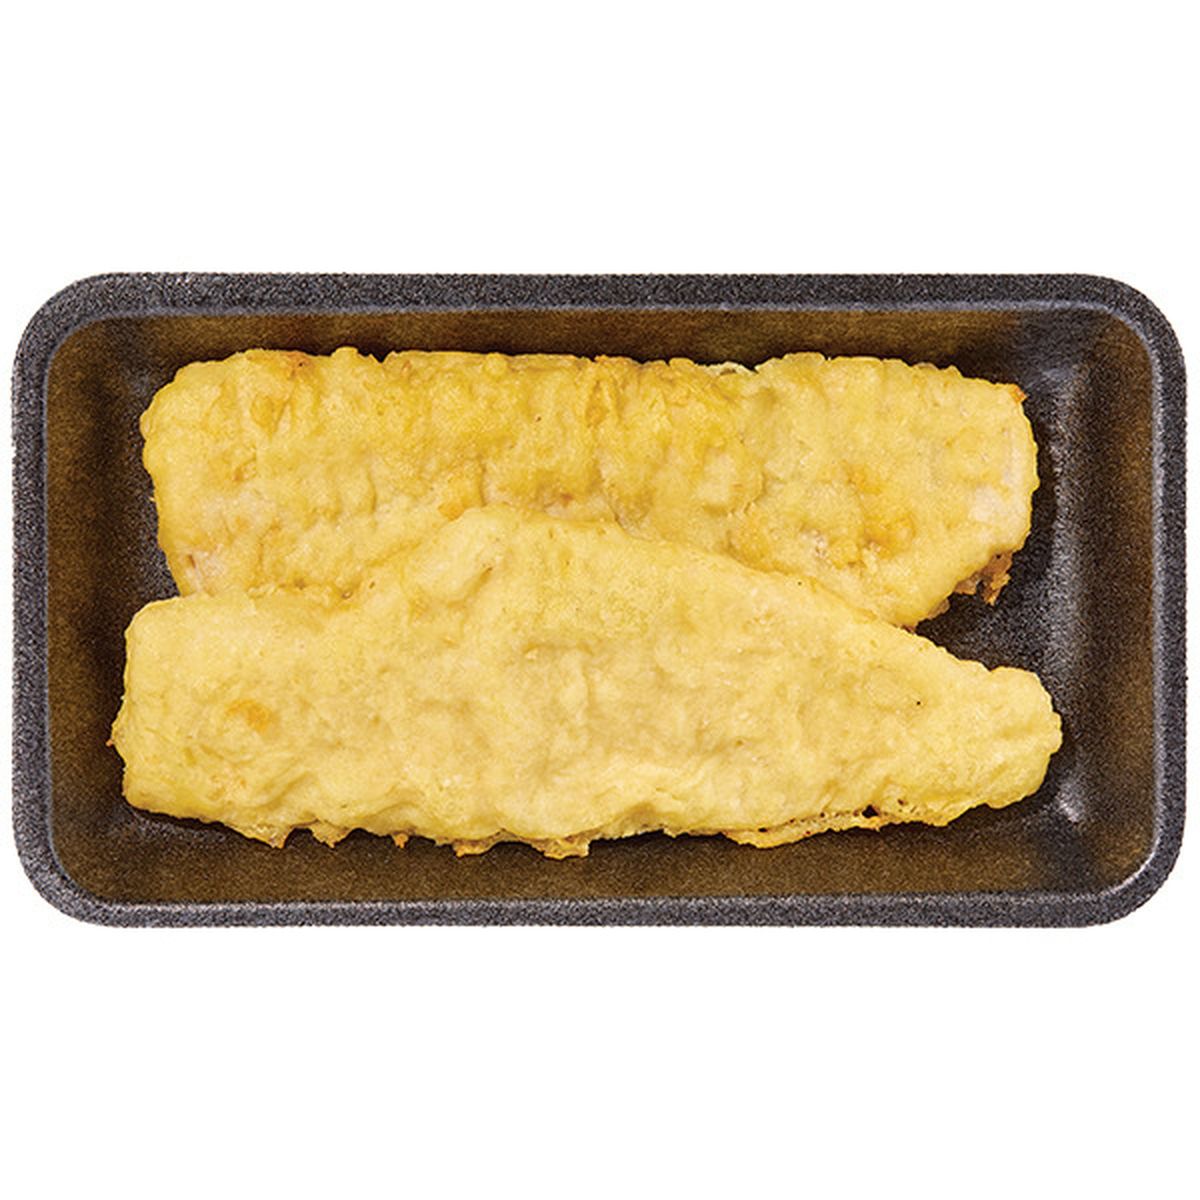 Calories in Wegmans Ready to Cook Beer Battered Haddock Fillets